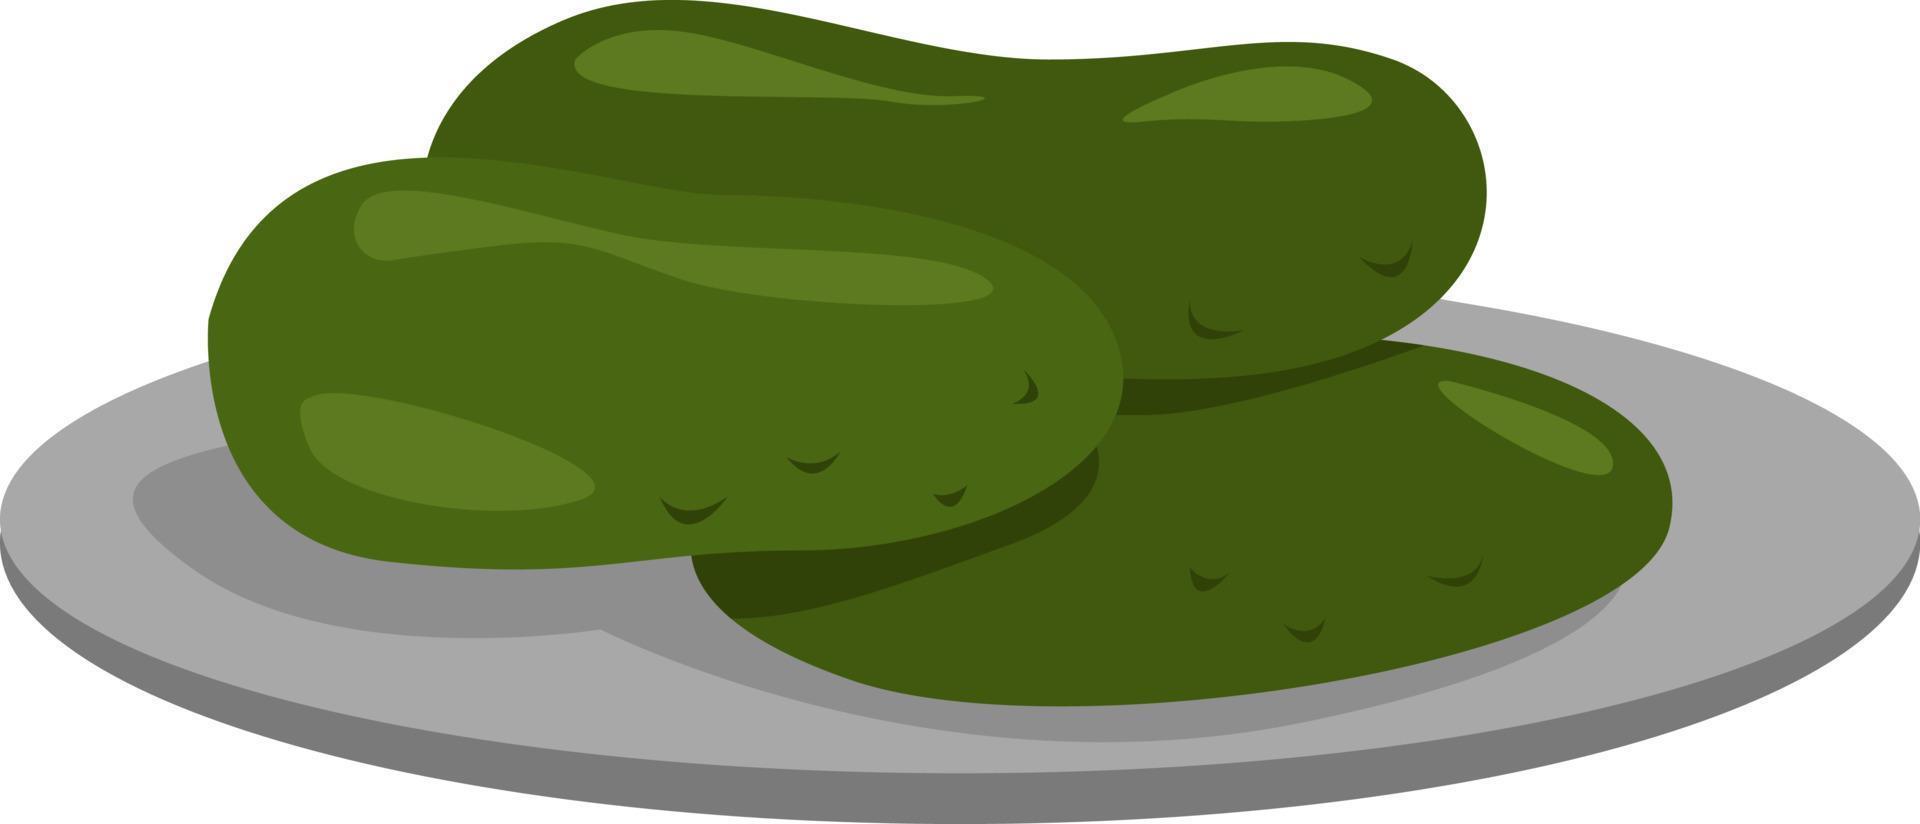 Salted cucumbers, illustration, vector on white background.